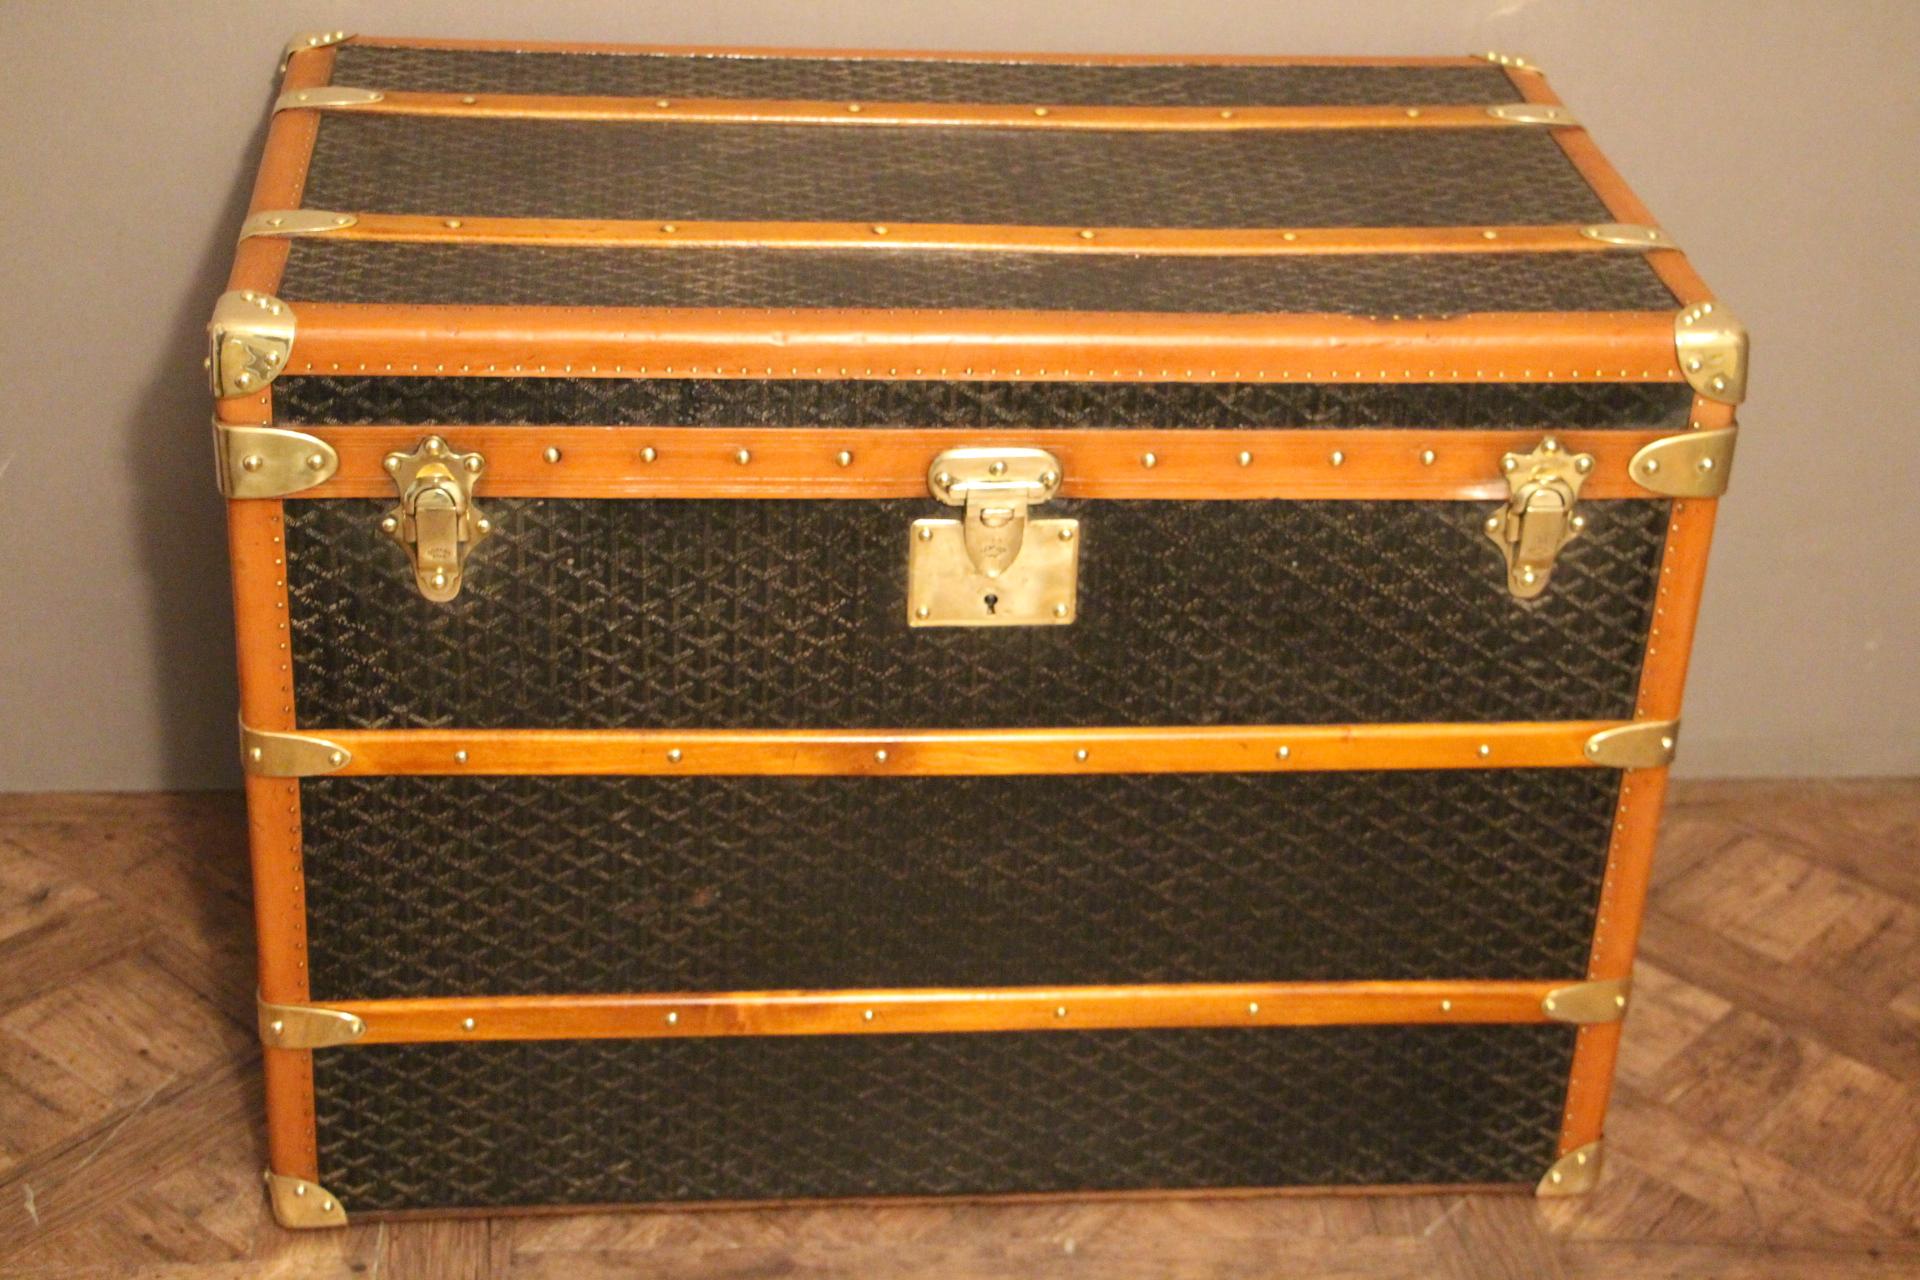 This Aine Goyard trunk has got very nice proportions as well as a beautiful, warm patina.
It features its famous and sought after chevron canvas, its original brass stamped lock, brass stamped clasps and leather side handles. Honey color lozine